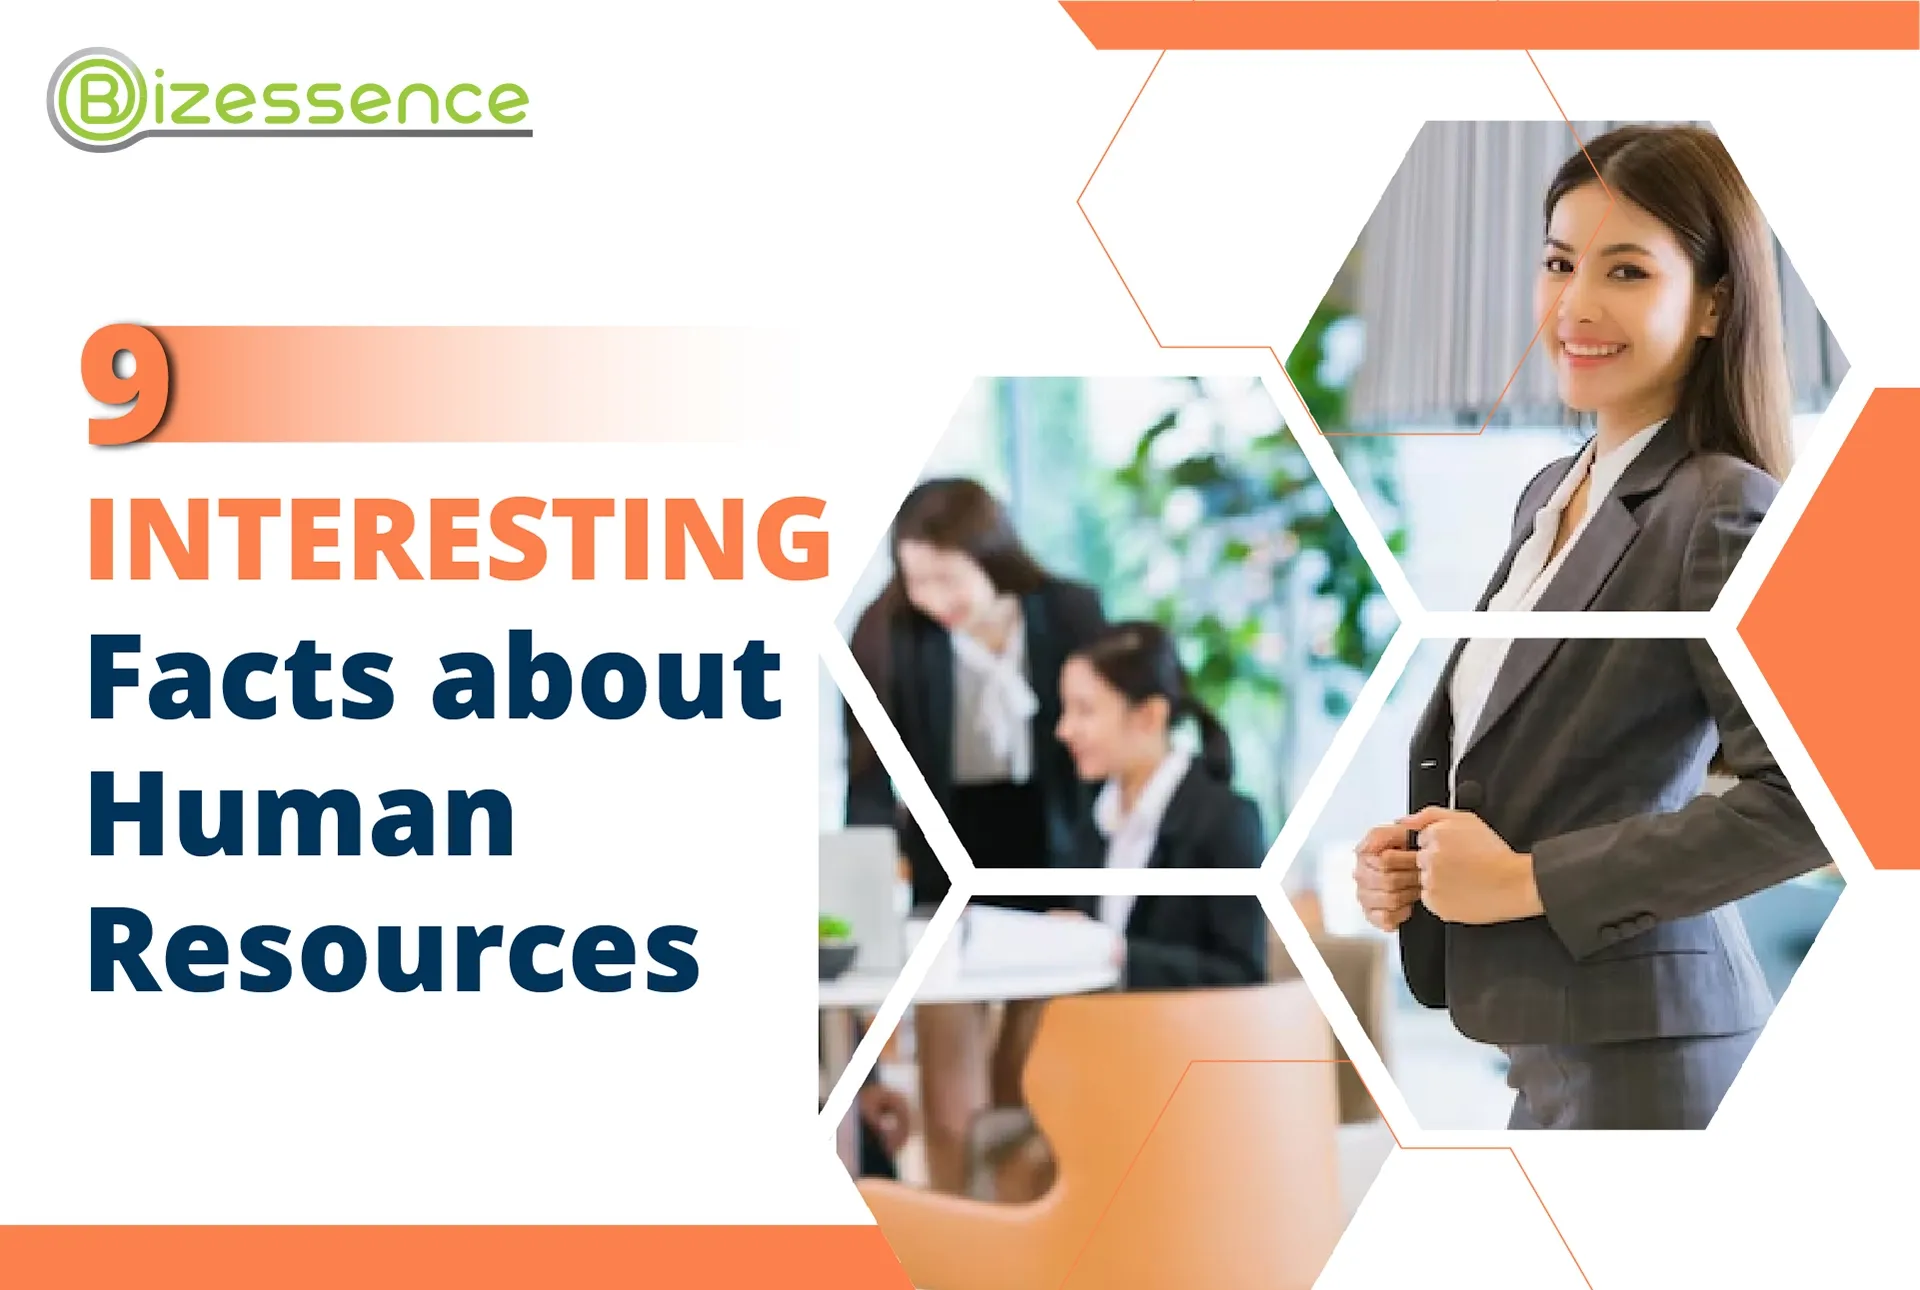 9 Interesting Facts about Human Resources